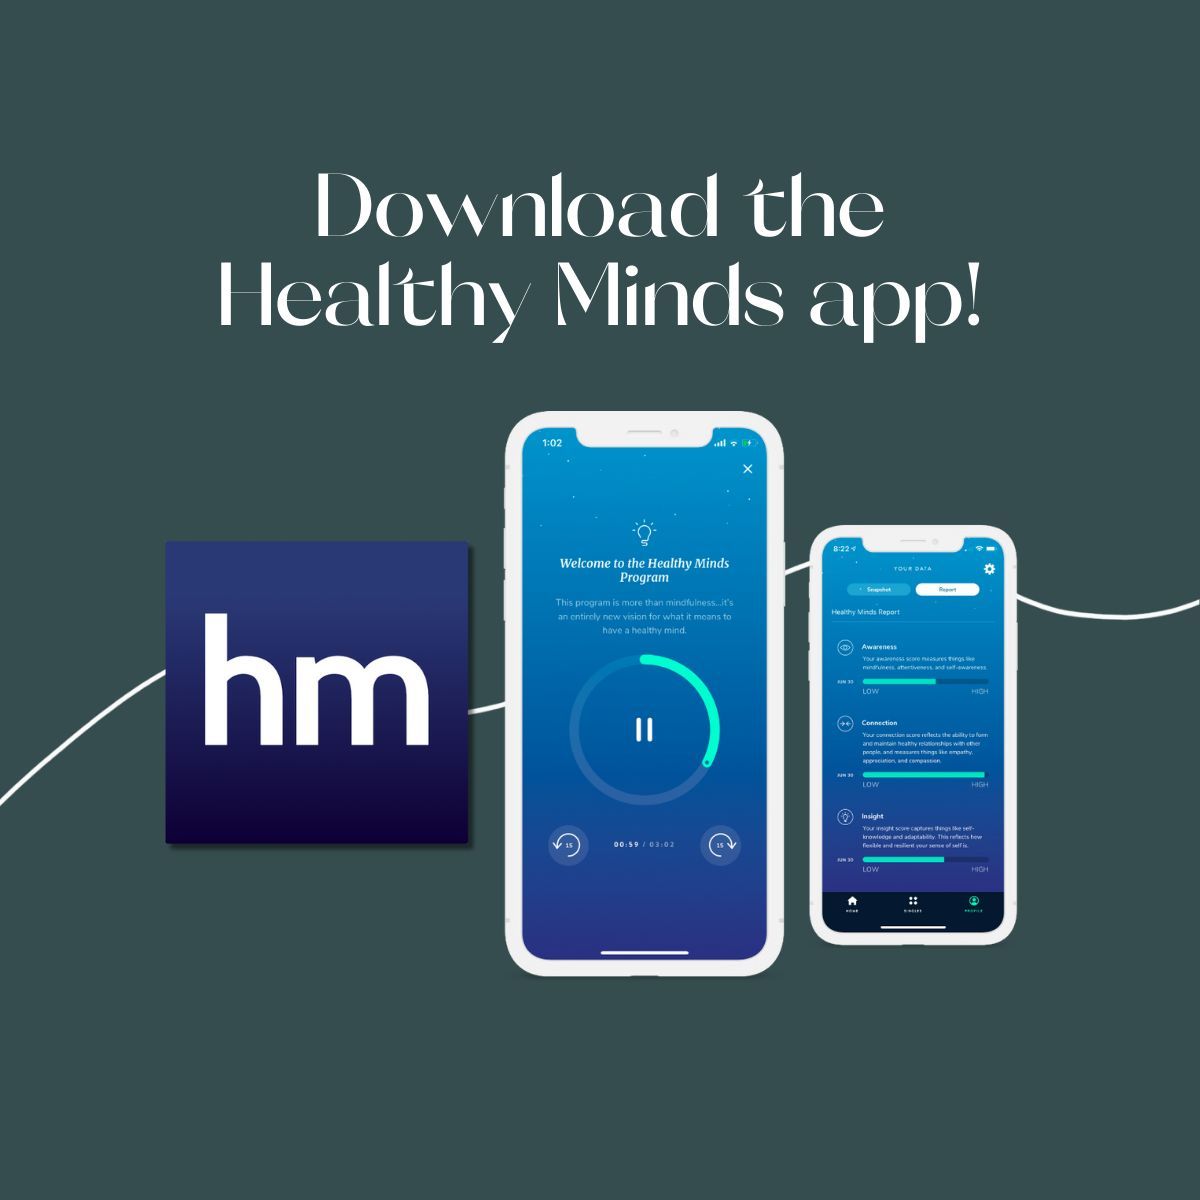 Download the 'Healthy Minds' app! It's a great tool for improving your mental well-being. With a user-friendly interface and various features, you can track your mood, set goals, and access mental health resources. Experience its positive impact on your overall well-being.